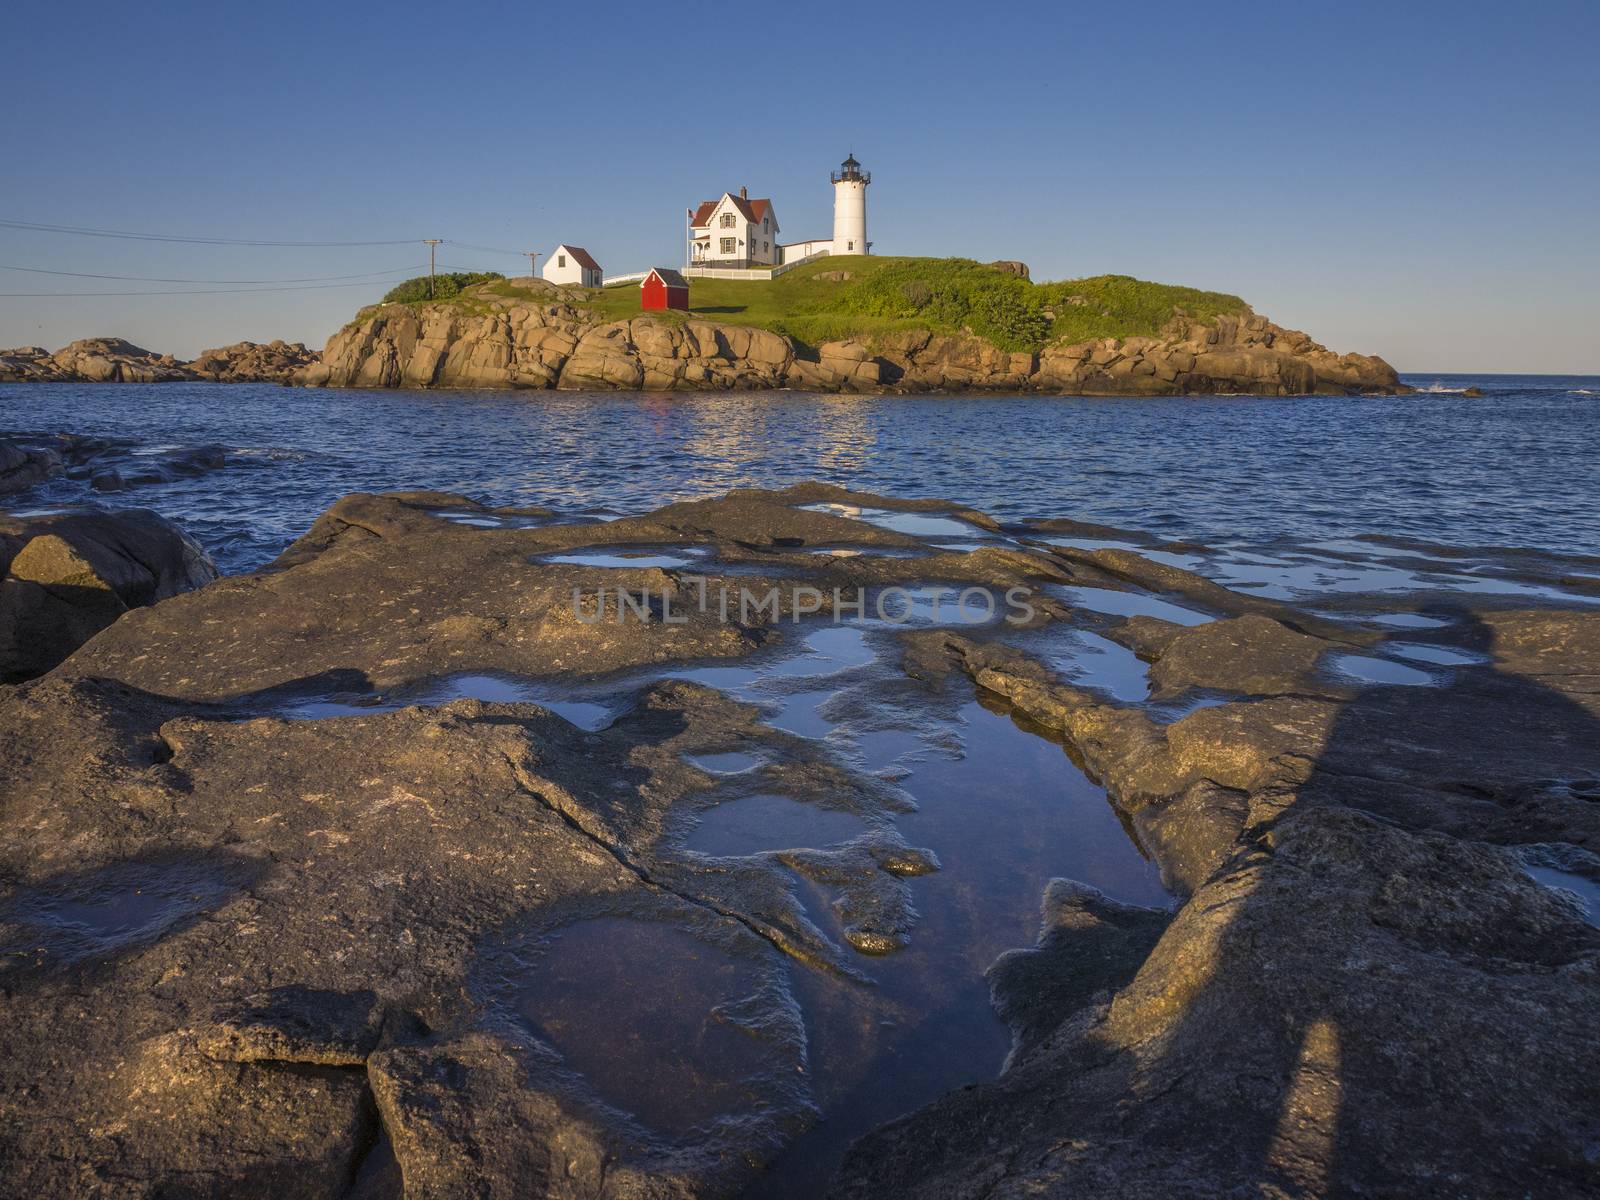 Lighthouse2 by f/2sumicron